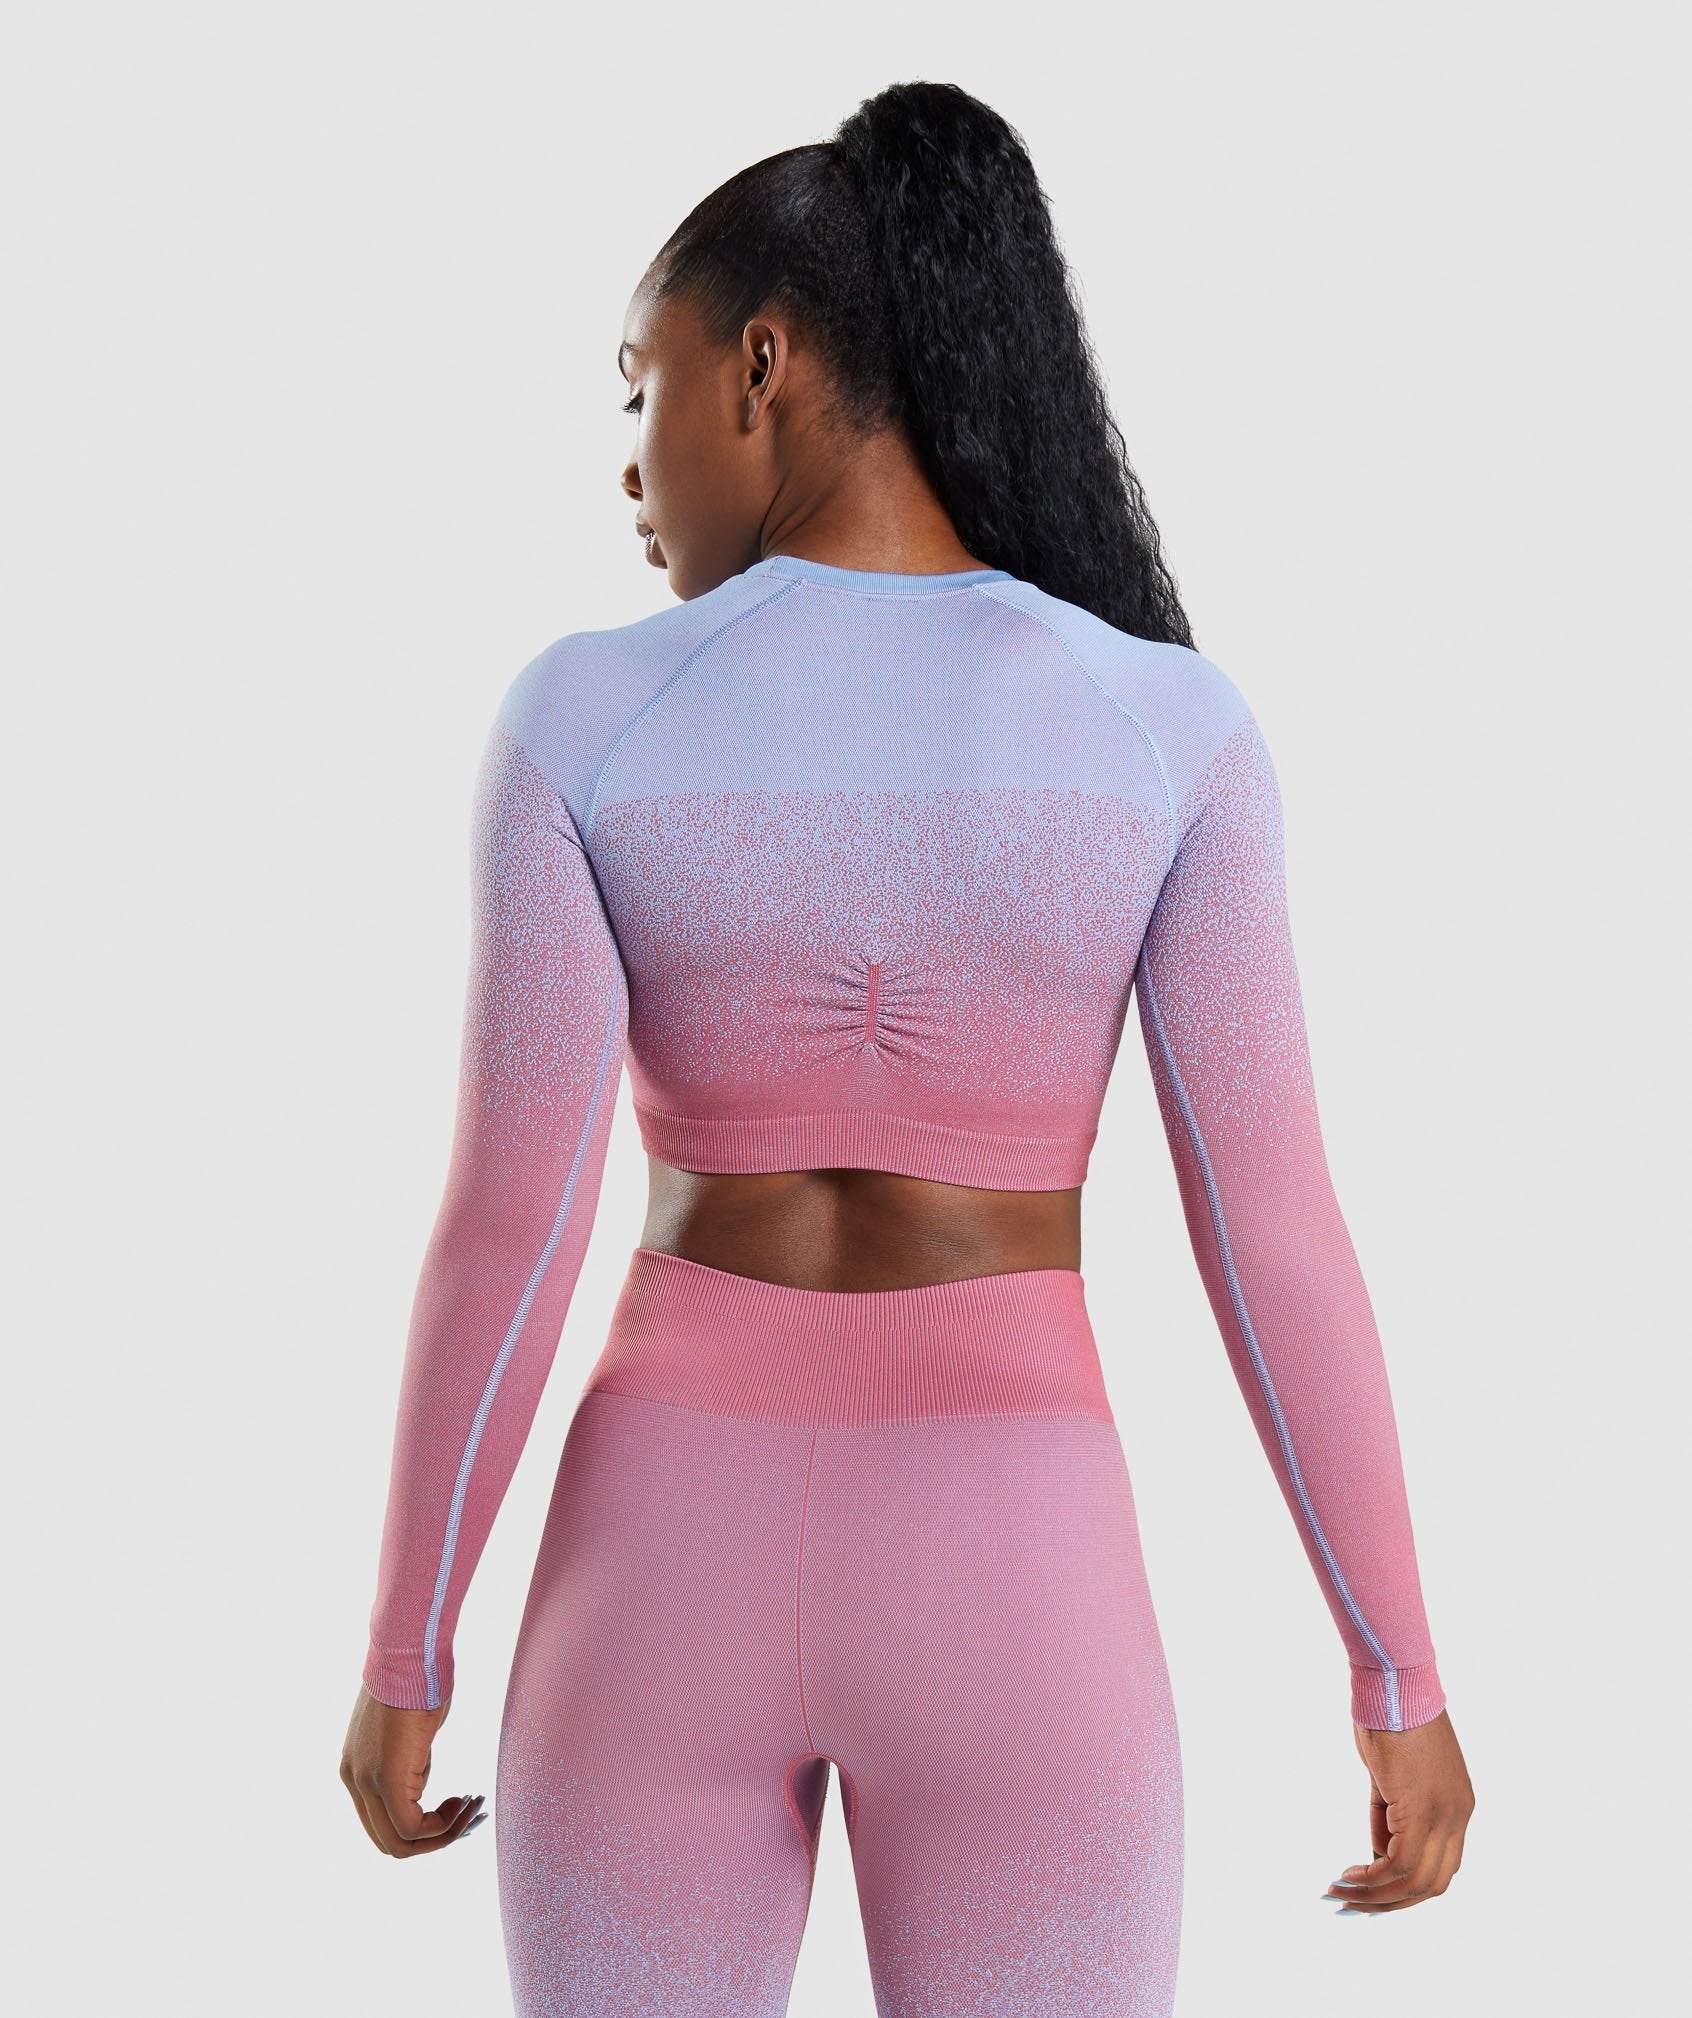 Gymshark Adapt Ombre Seamless Leggings and Long Sleeve Crop Top - Burgundy  Marbl Size XS - $69 - From Lynne